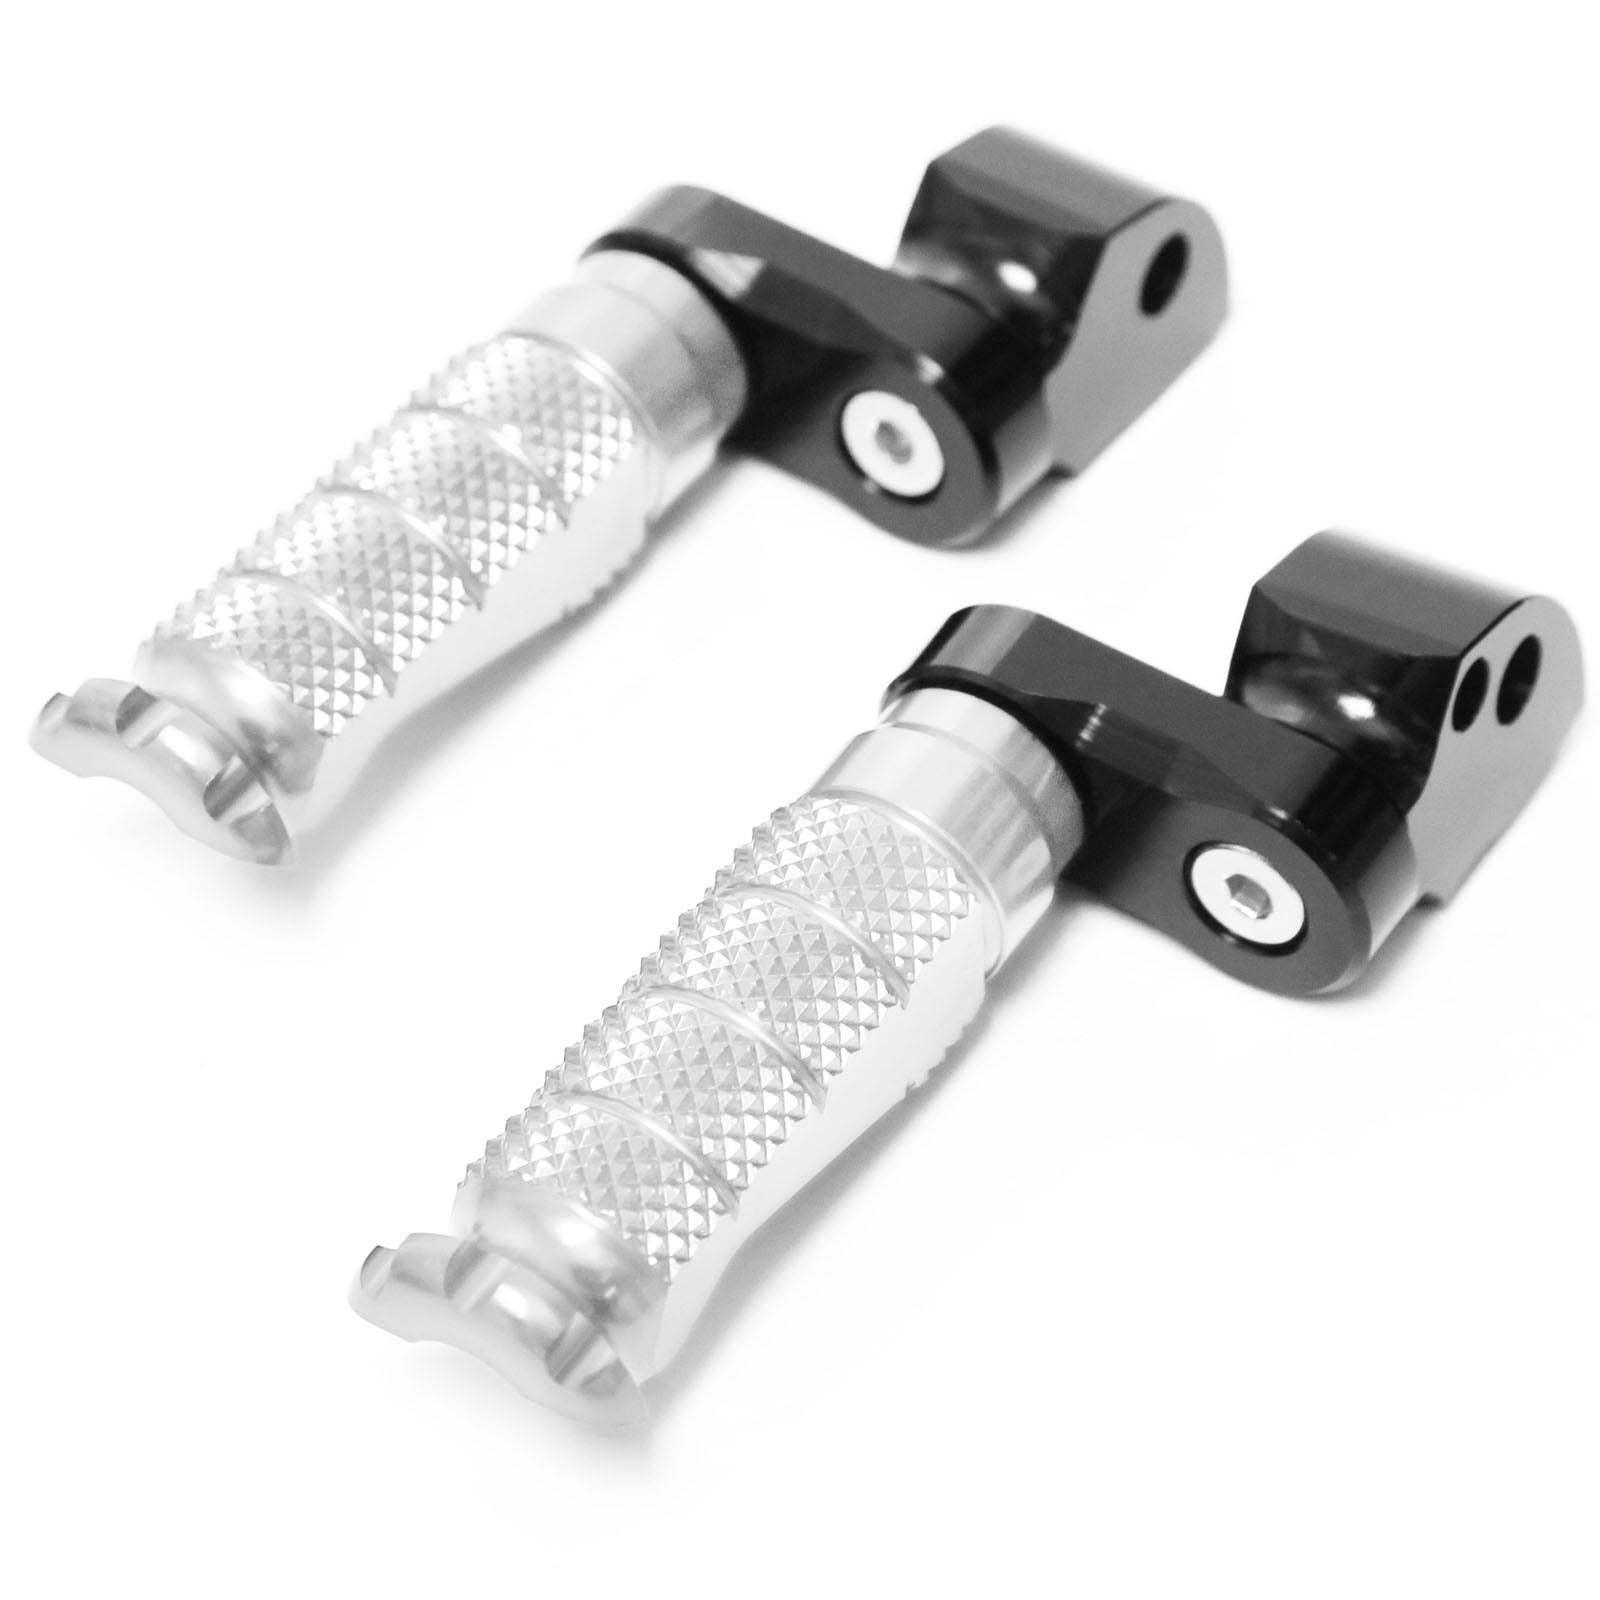 Fits Yamaha MT-01 MT-07 MT-10 25mm Extension Rear R-FIGHT Silver Foot Pegs